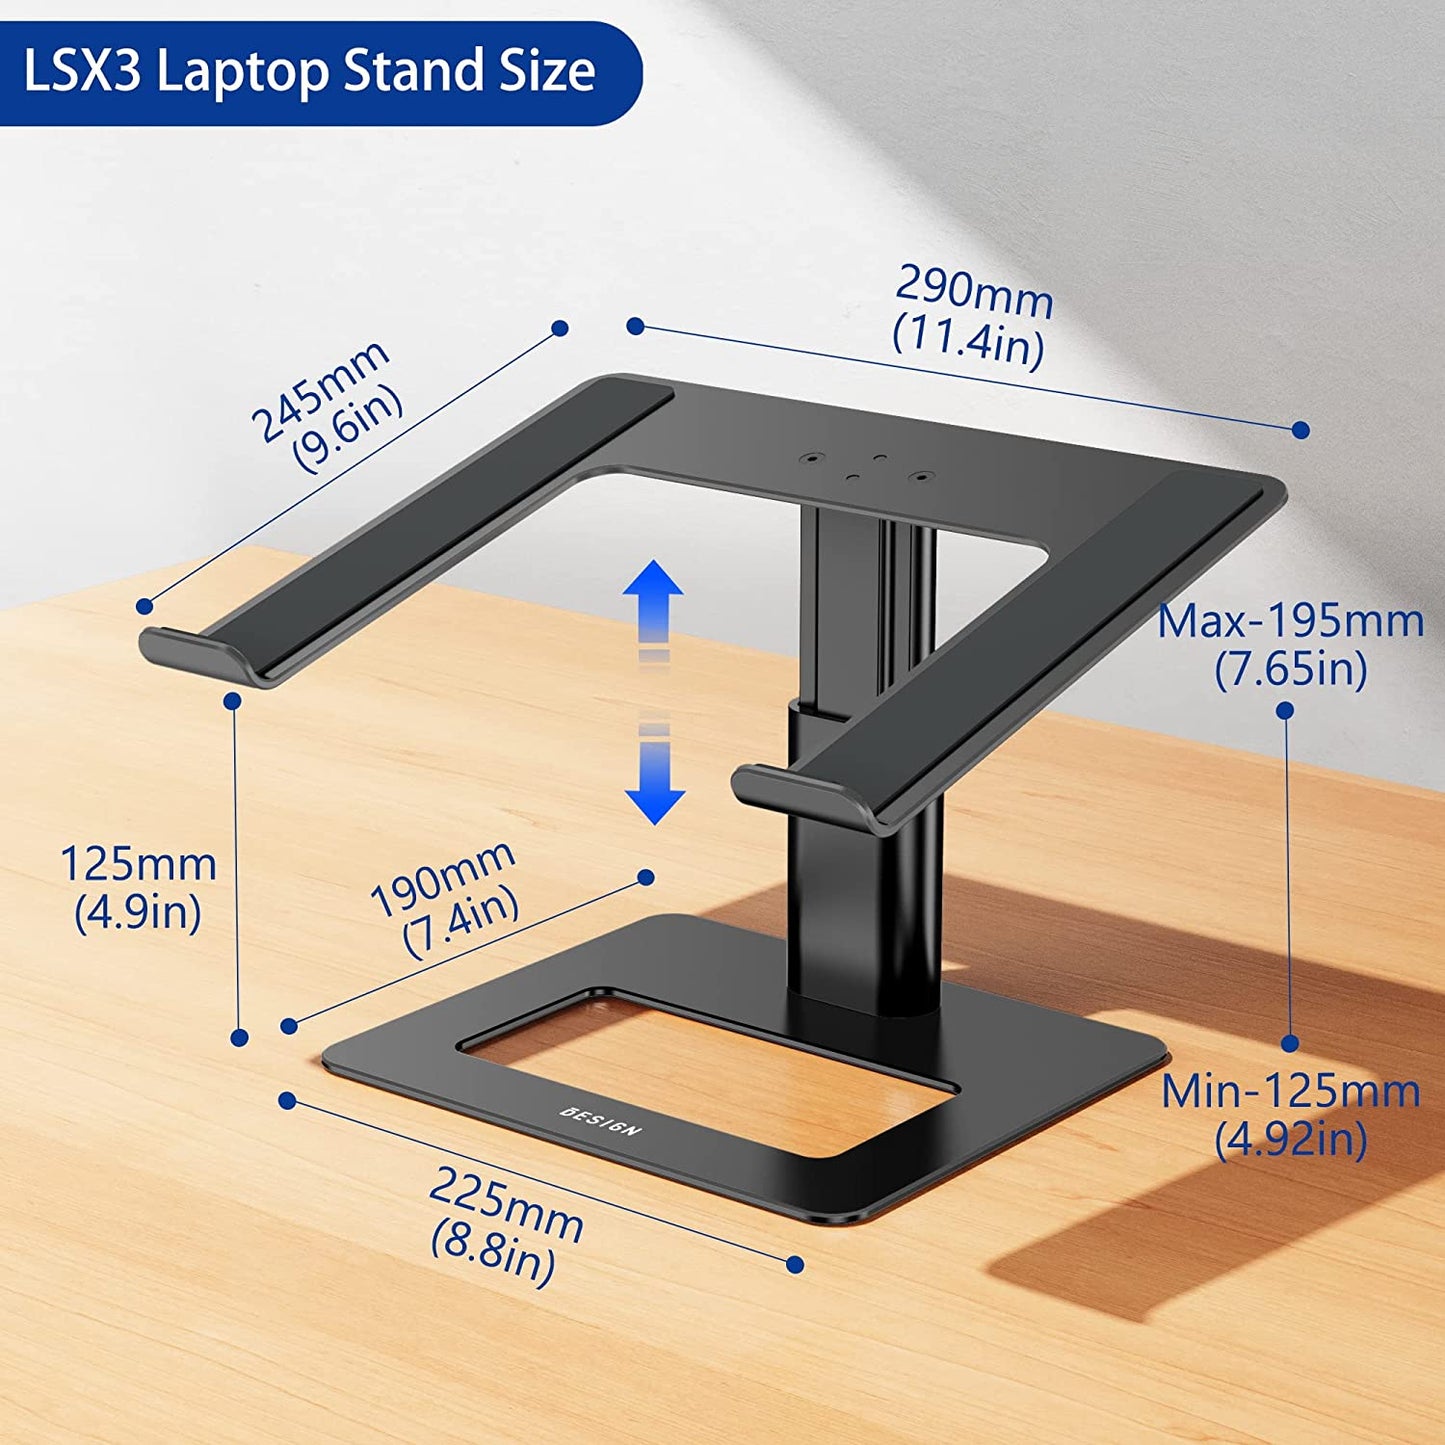 Aluminum Laptop Stand, Ergonomic Adjustable Notebook Stand, Riser Holder Computer Stand Compatible with Air, Pro, Dell, HP, Lenovo More 10-15.6" Laptops (Black)